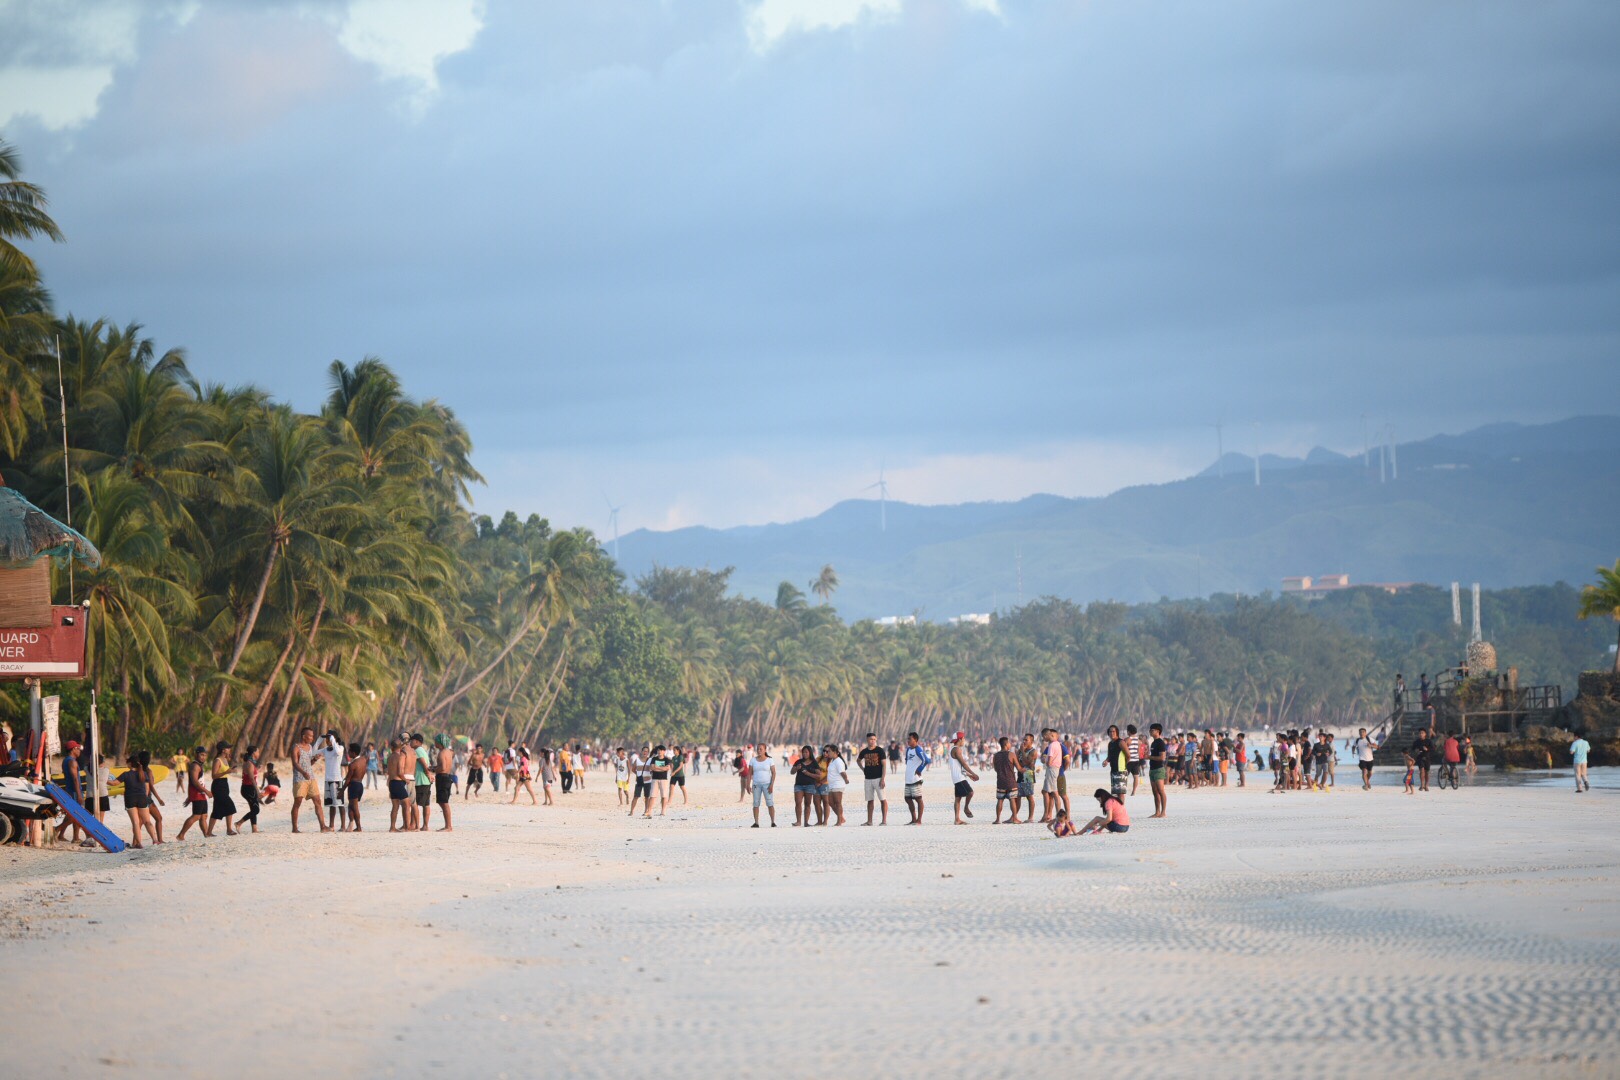 VENDOR-FREE. Scenes at the shore of Boracay on the eve of its opening, October 25, 2018. Photo by Alecs Ongcal / Rappler 